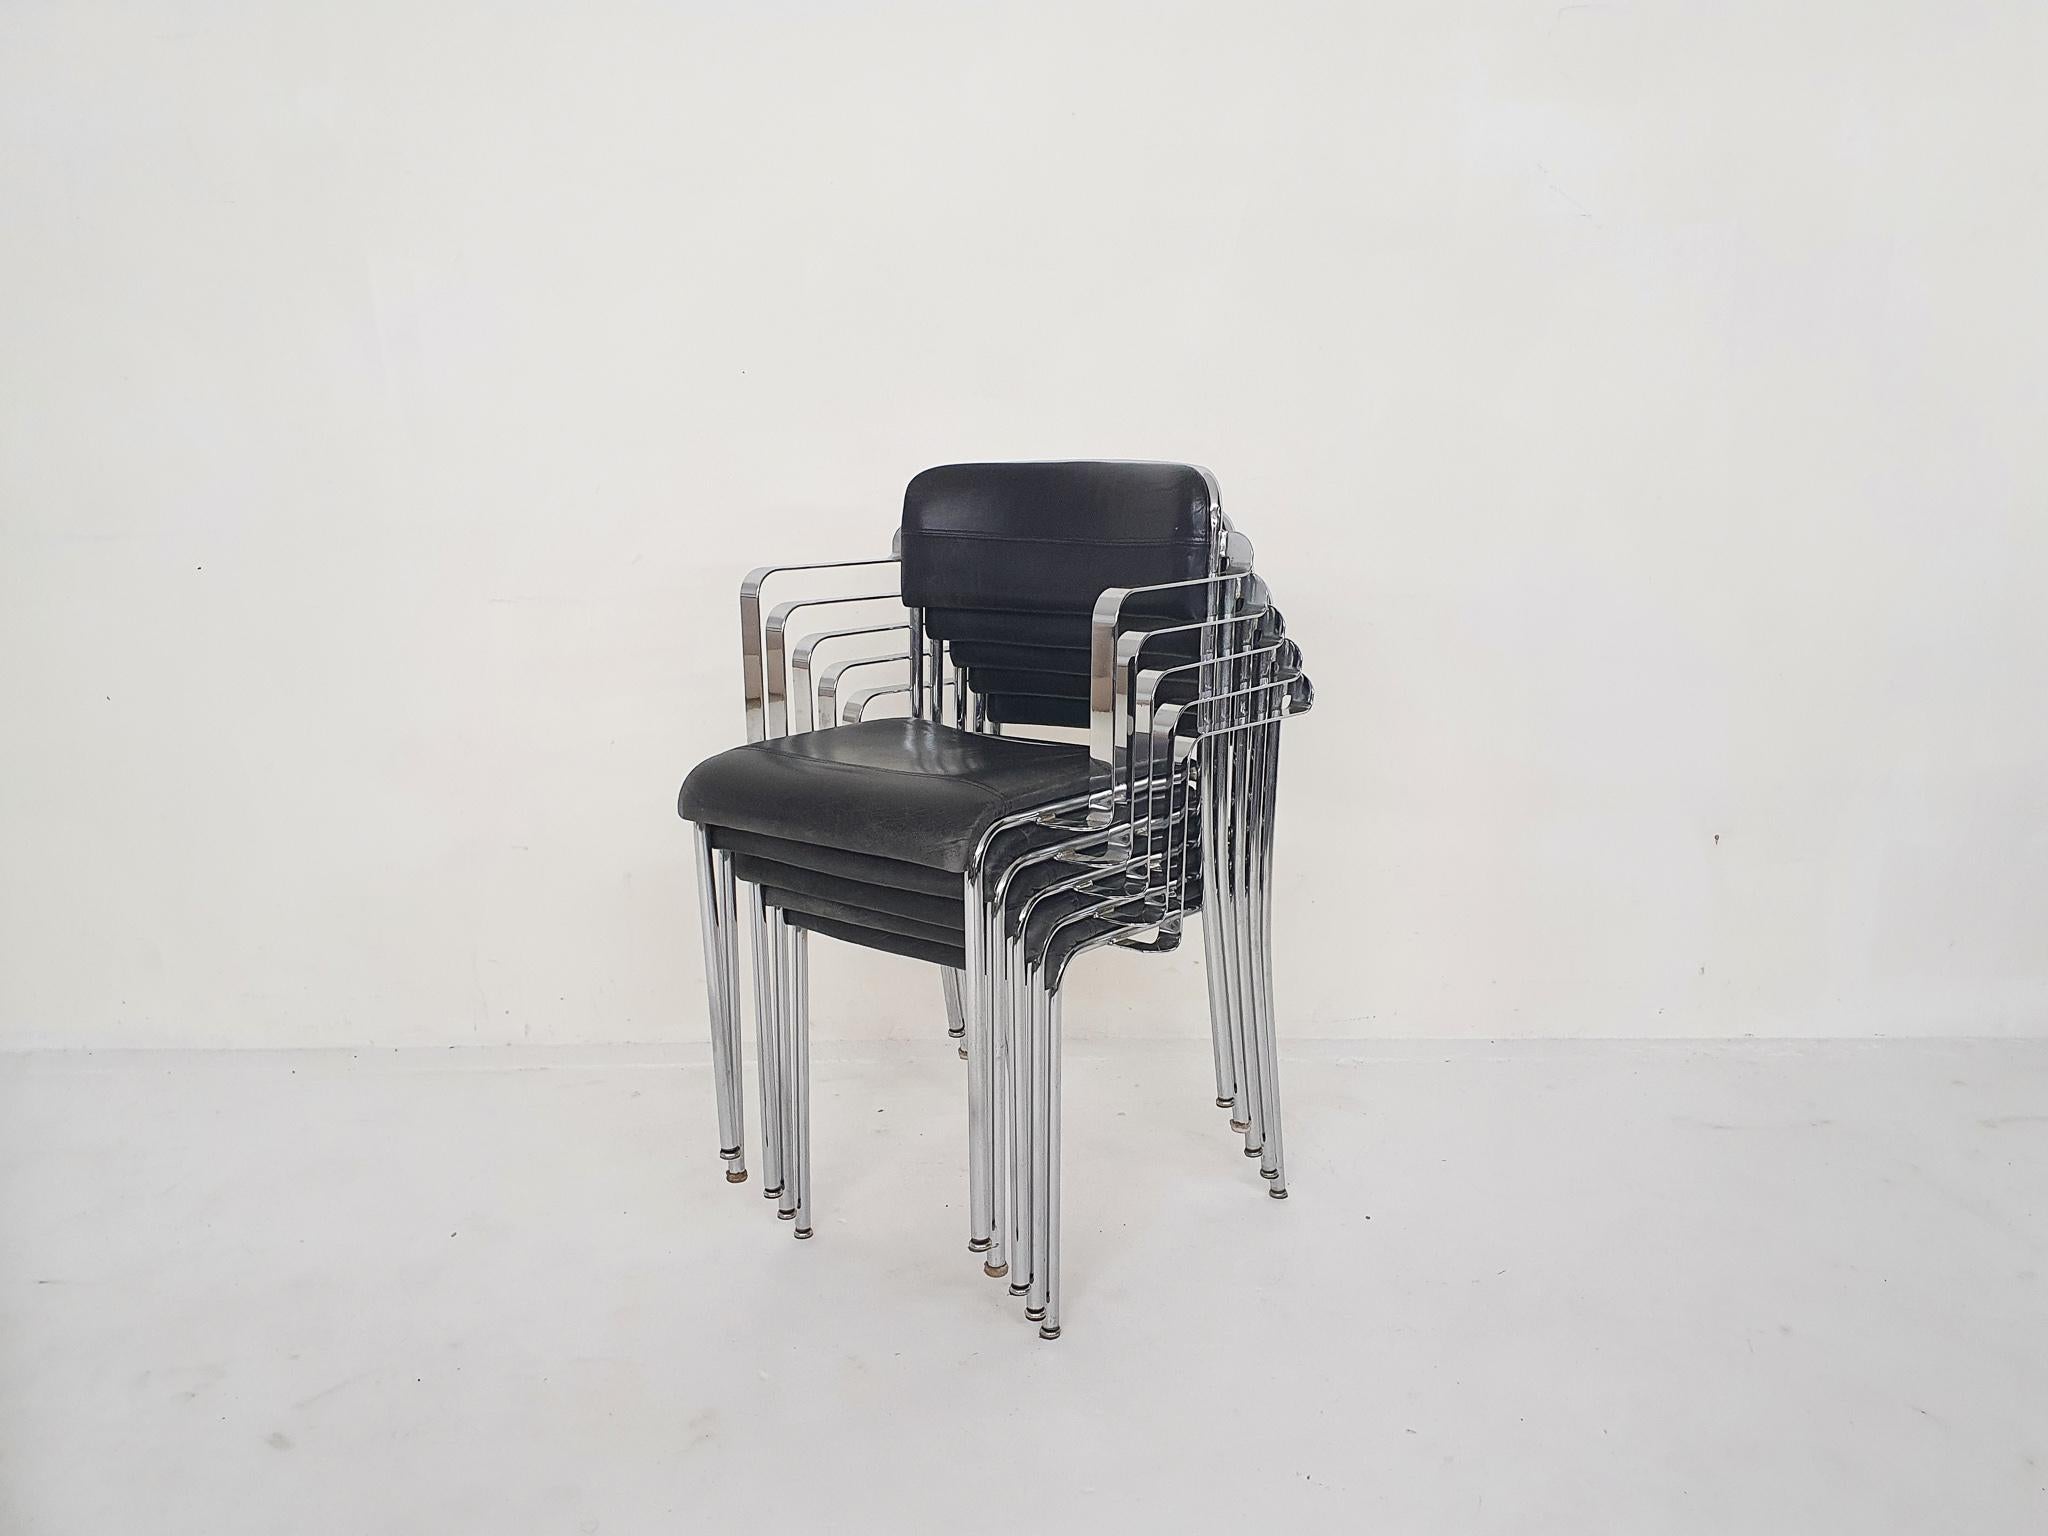 Stackable metal dining chairs with black leather upholstery. Manufactured by Aryform, Sweden.
The design reminds us of the designs of Le Corbusier or Poul Kjaerholm.
The chairs have traces of use consistent with age and use.
Height of the arm rests